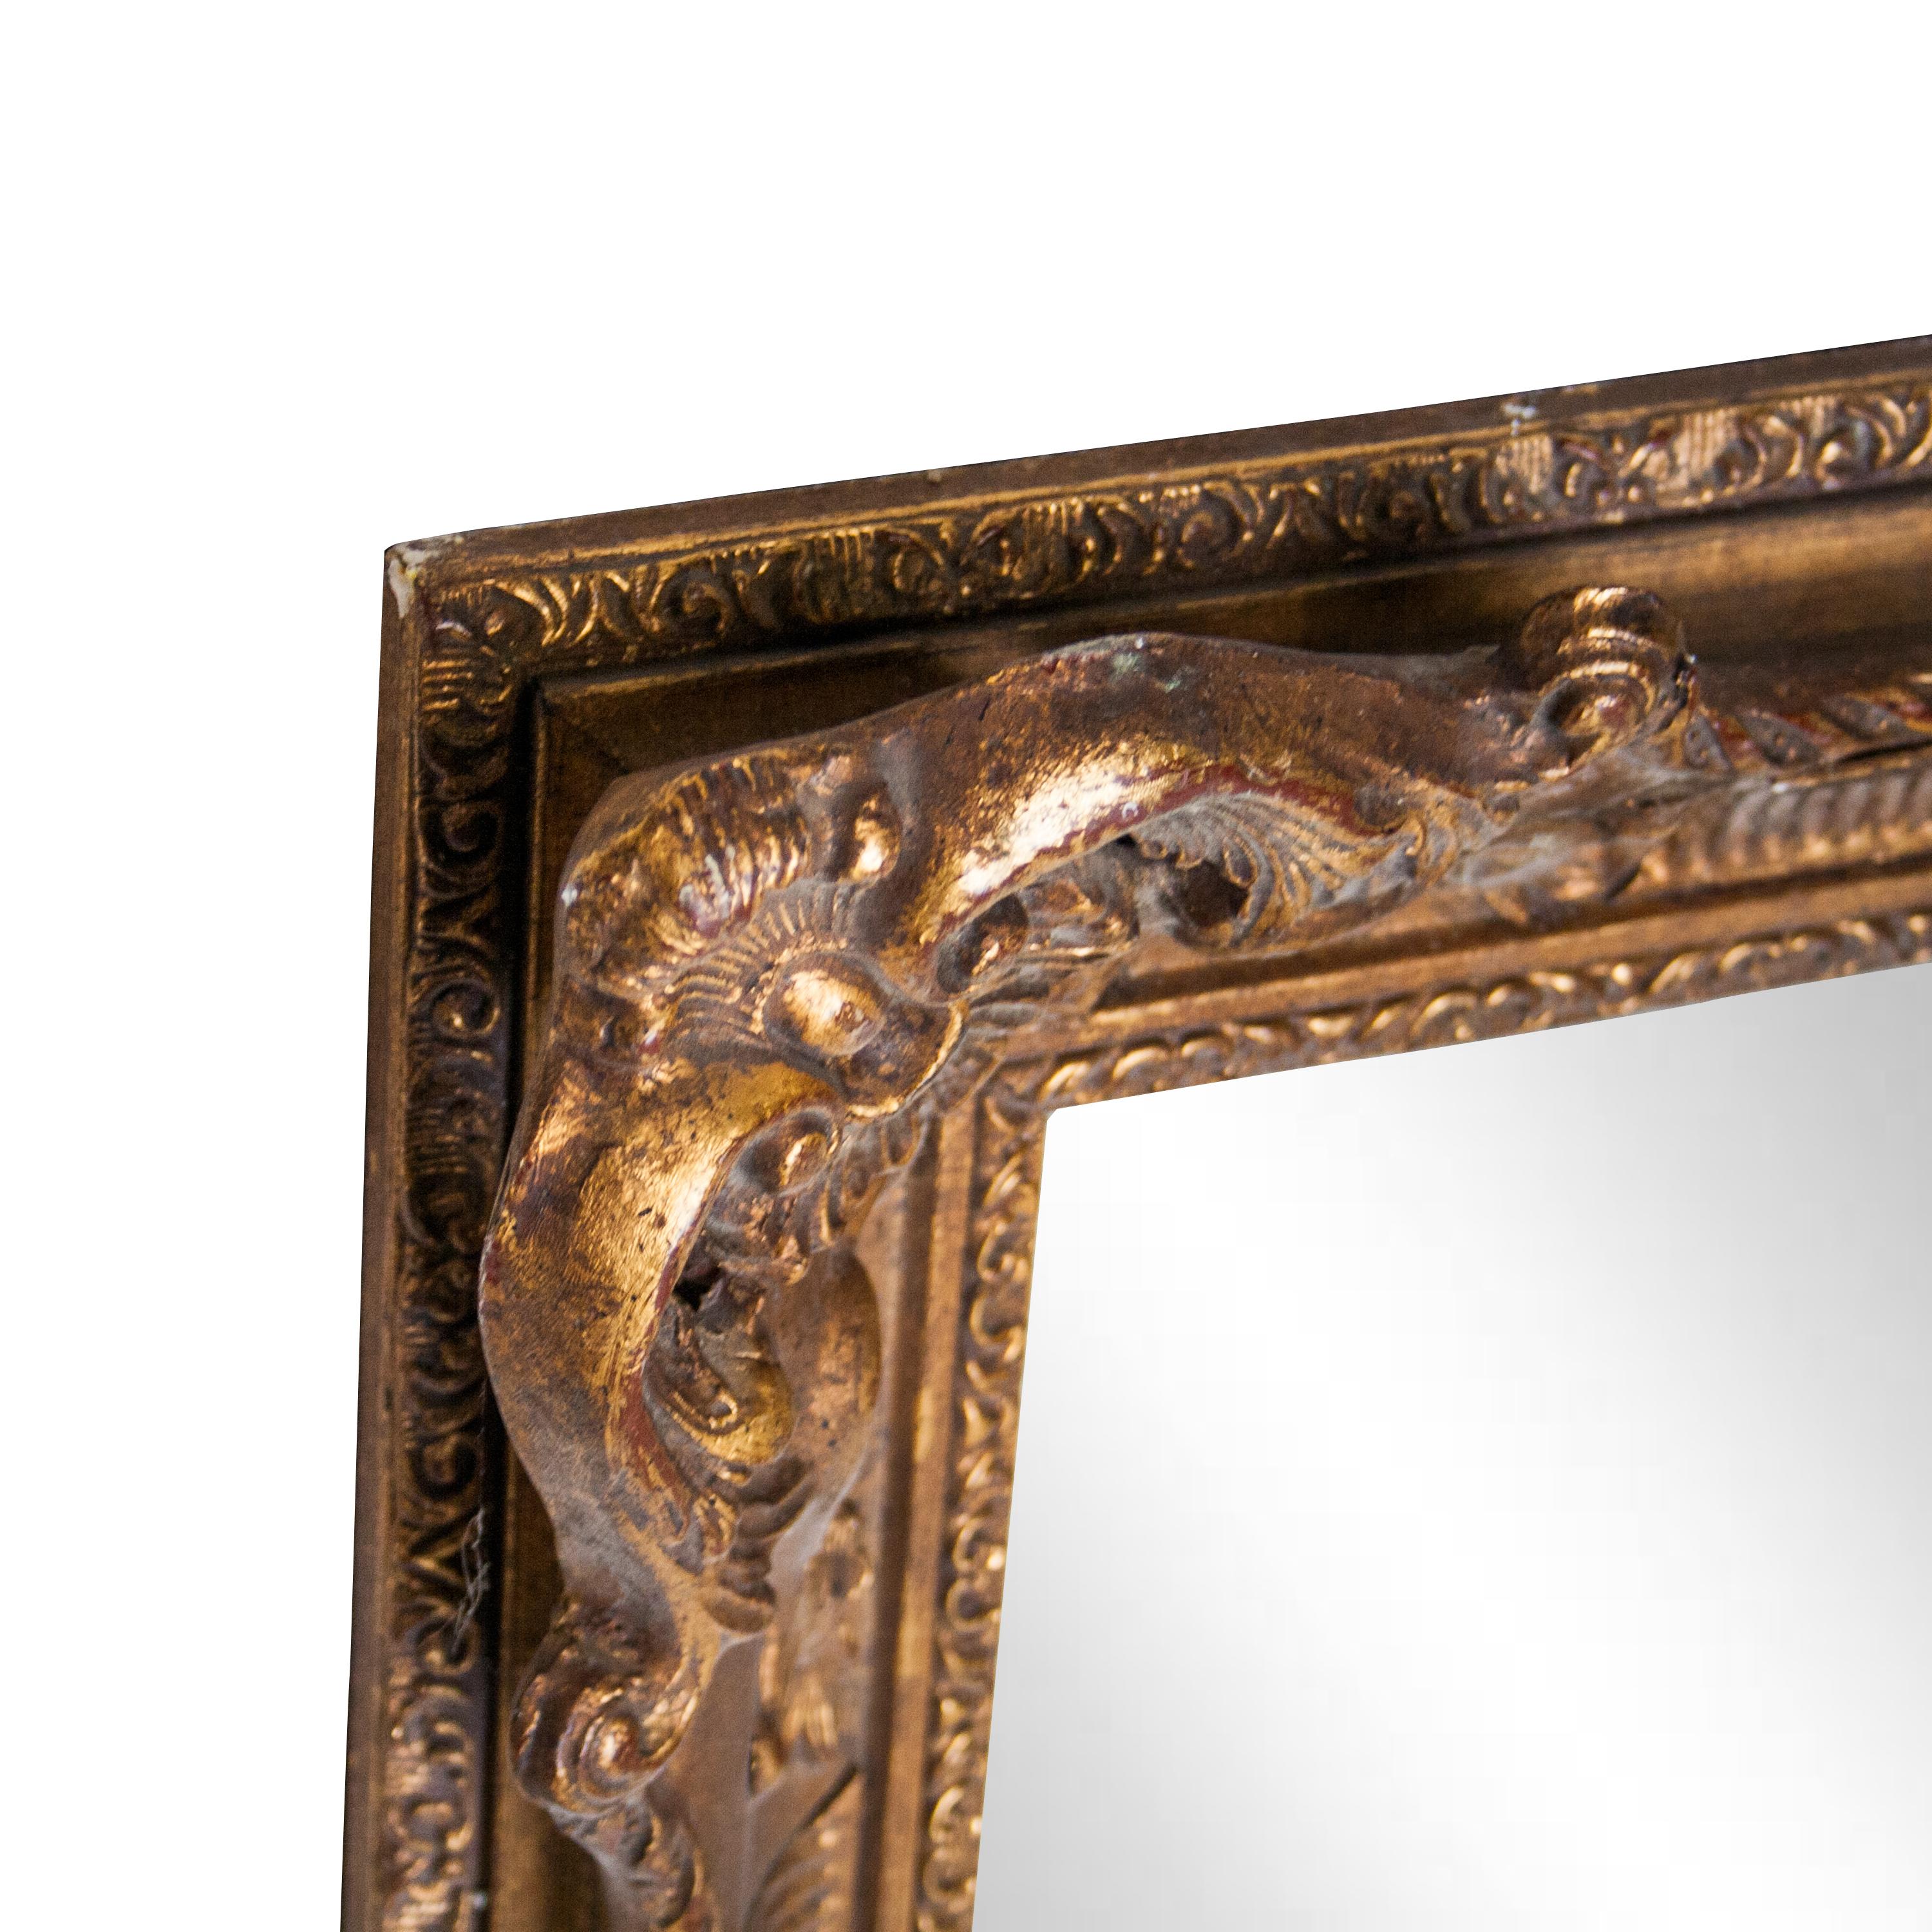 Neoclassical Revival Neoclassical Baroque Gold Foil Hand Carved Wooden Mirror, 1970 For Sale